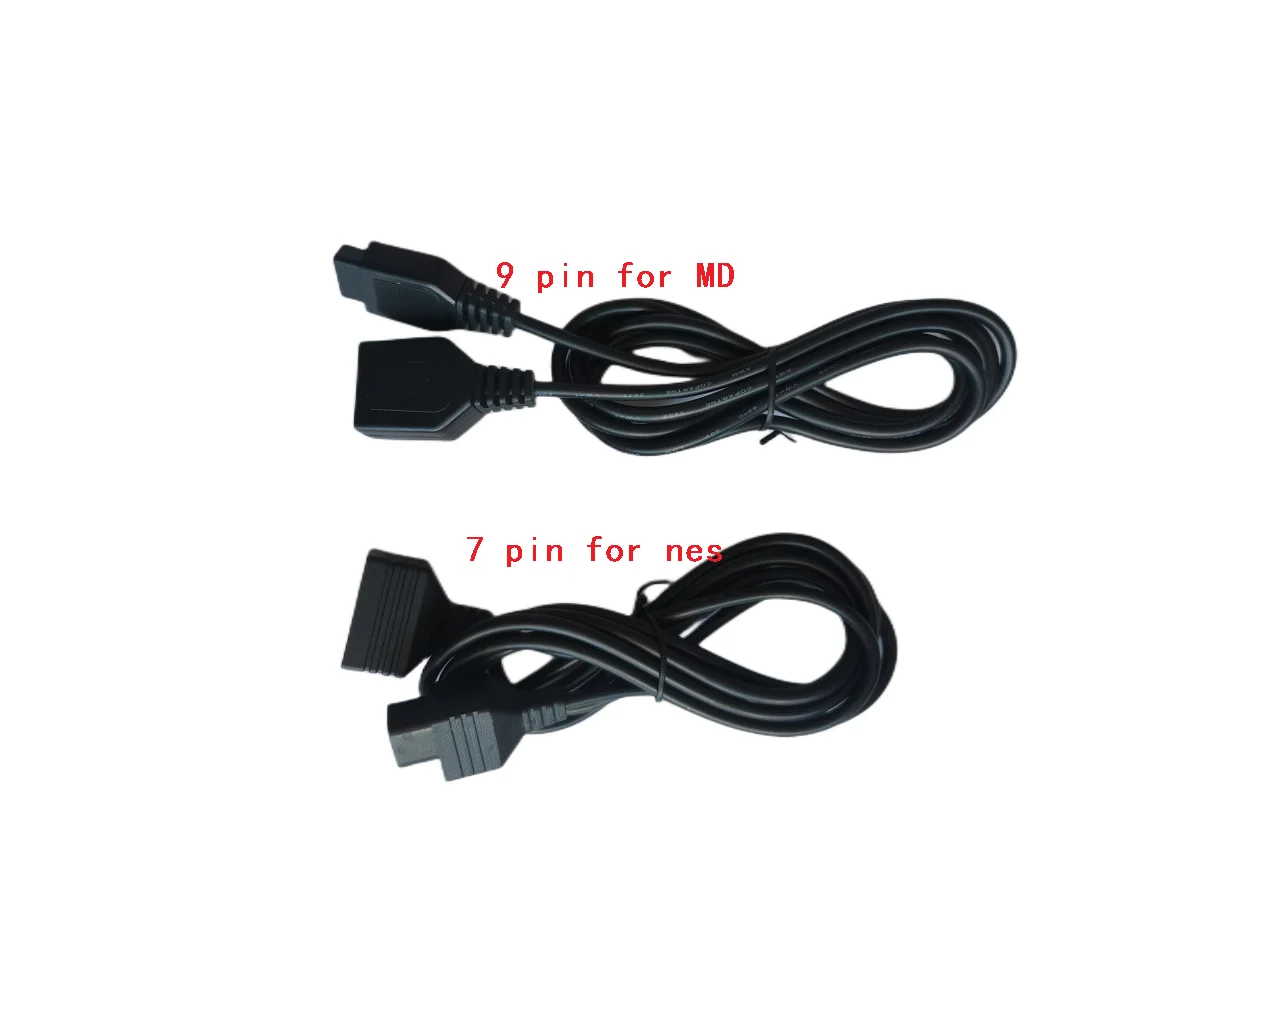 10 Pcs 1.8M Extension Cable for NES Lead for NINTENDO for sega MD2 GENESIS Game Console Gaming Accessories